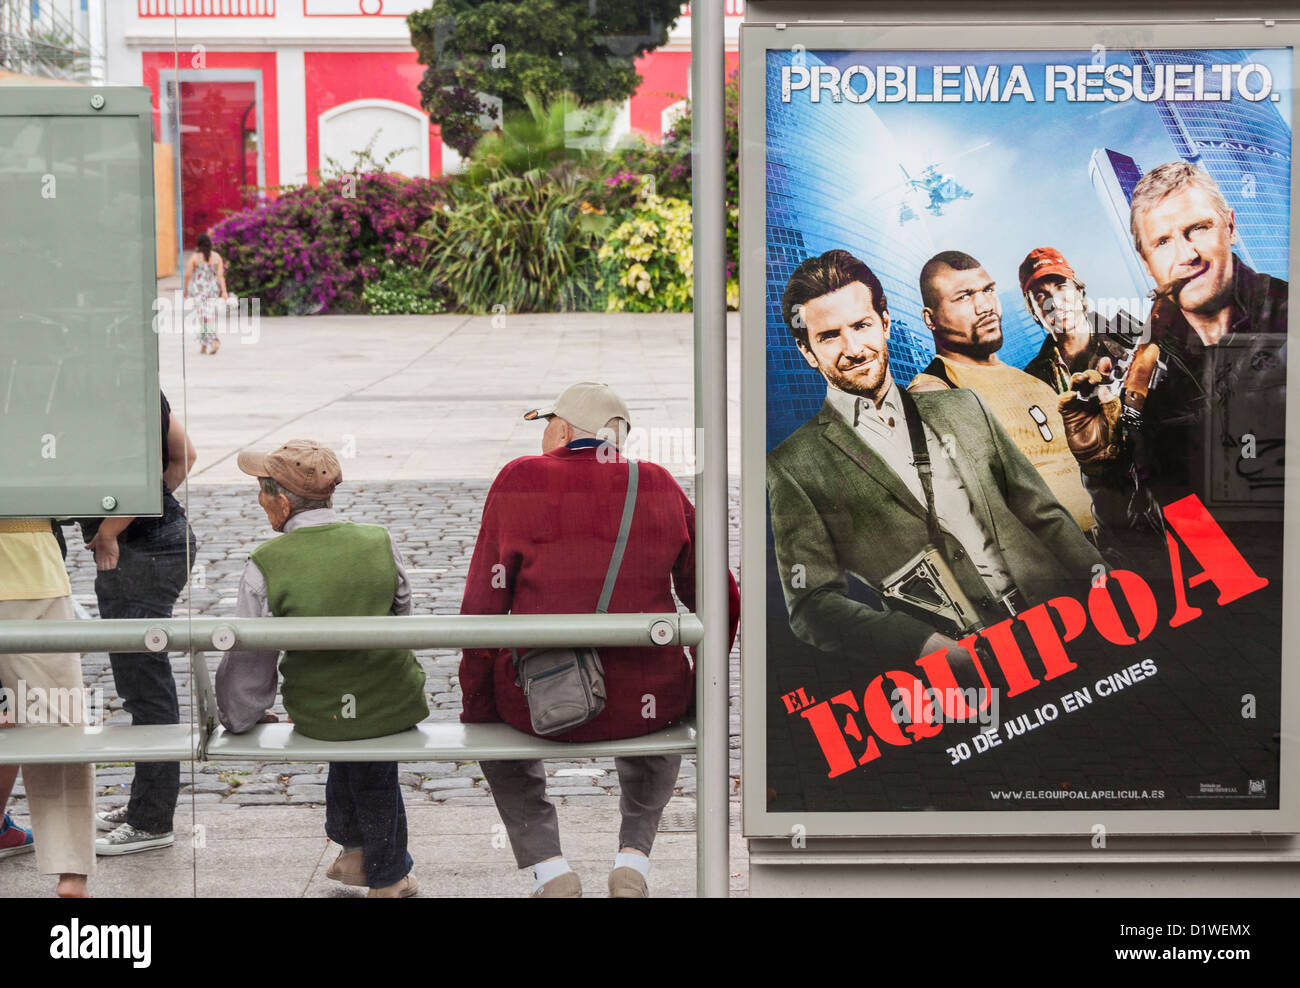 Two elderly Spanish men next to El Equipo A (The A Team in Spanish) film poster at bus stop in Spain Stock Photo